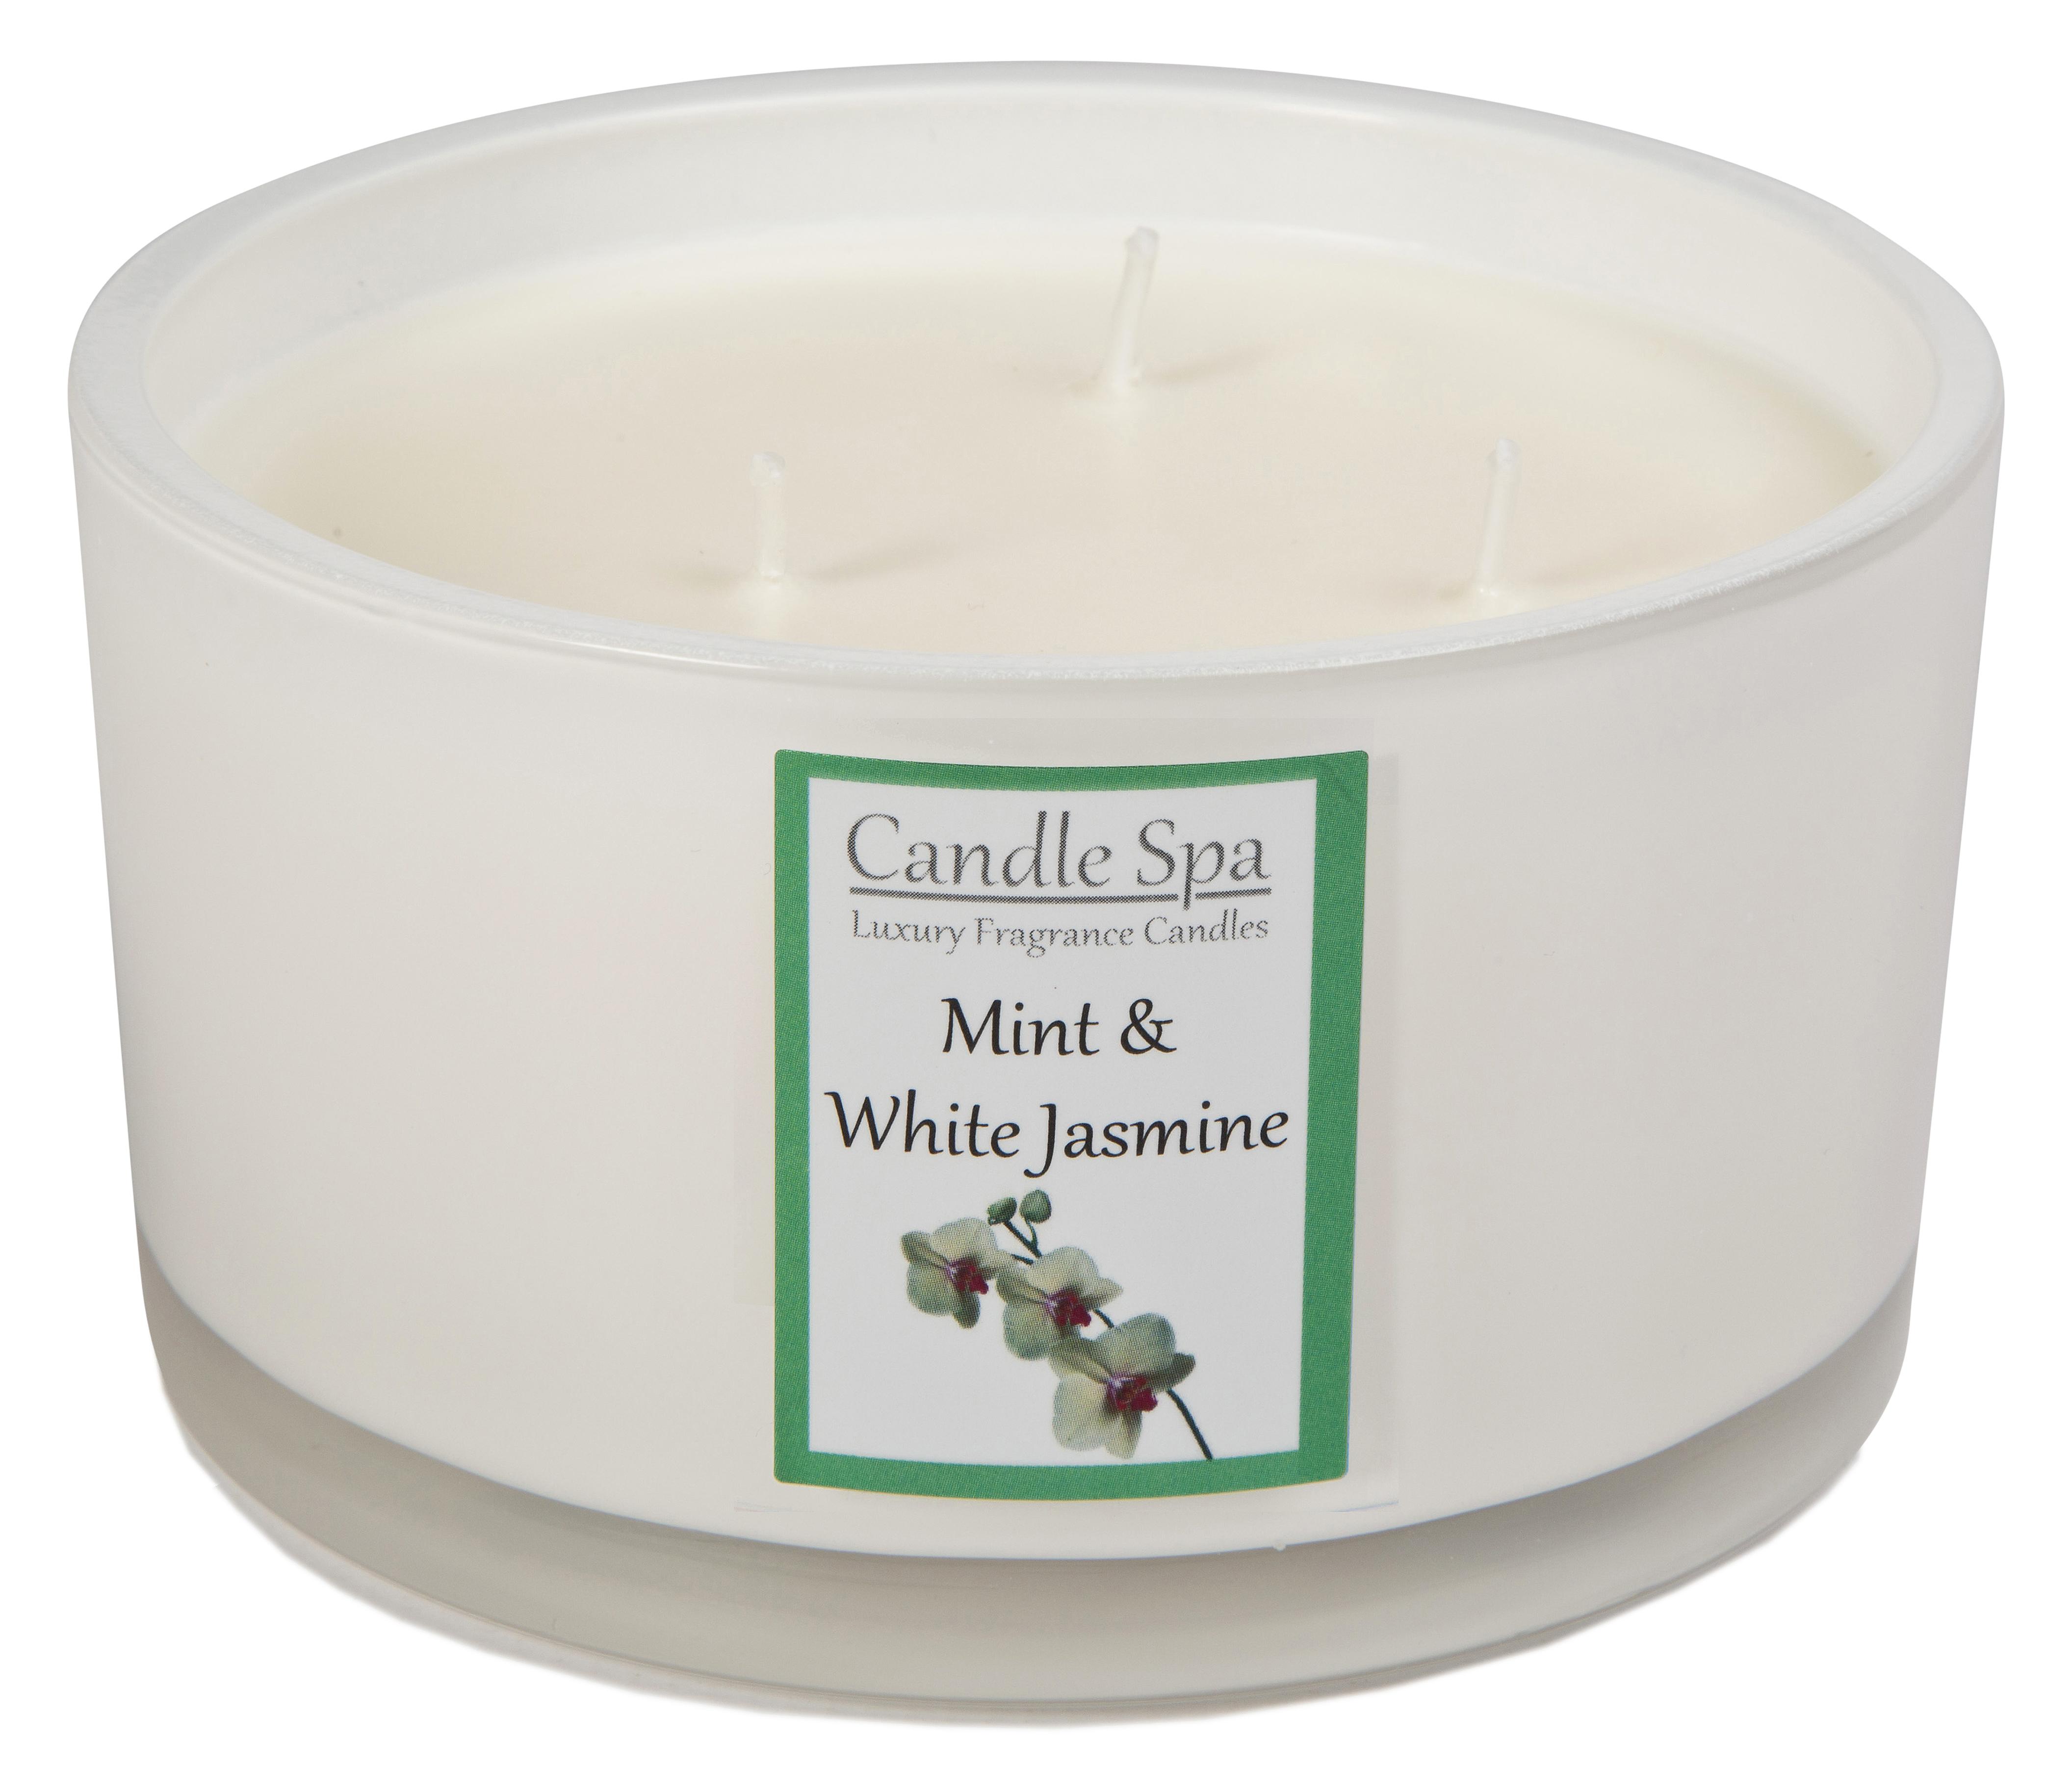 Candle Spa Luxury 3-Wick Candle - Mint & White Jasmine